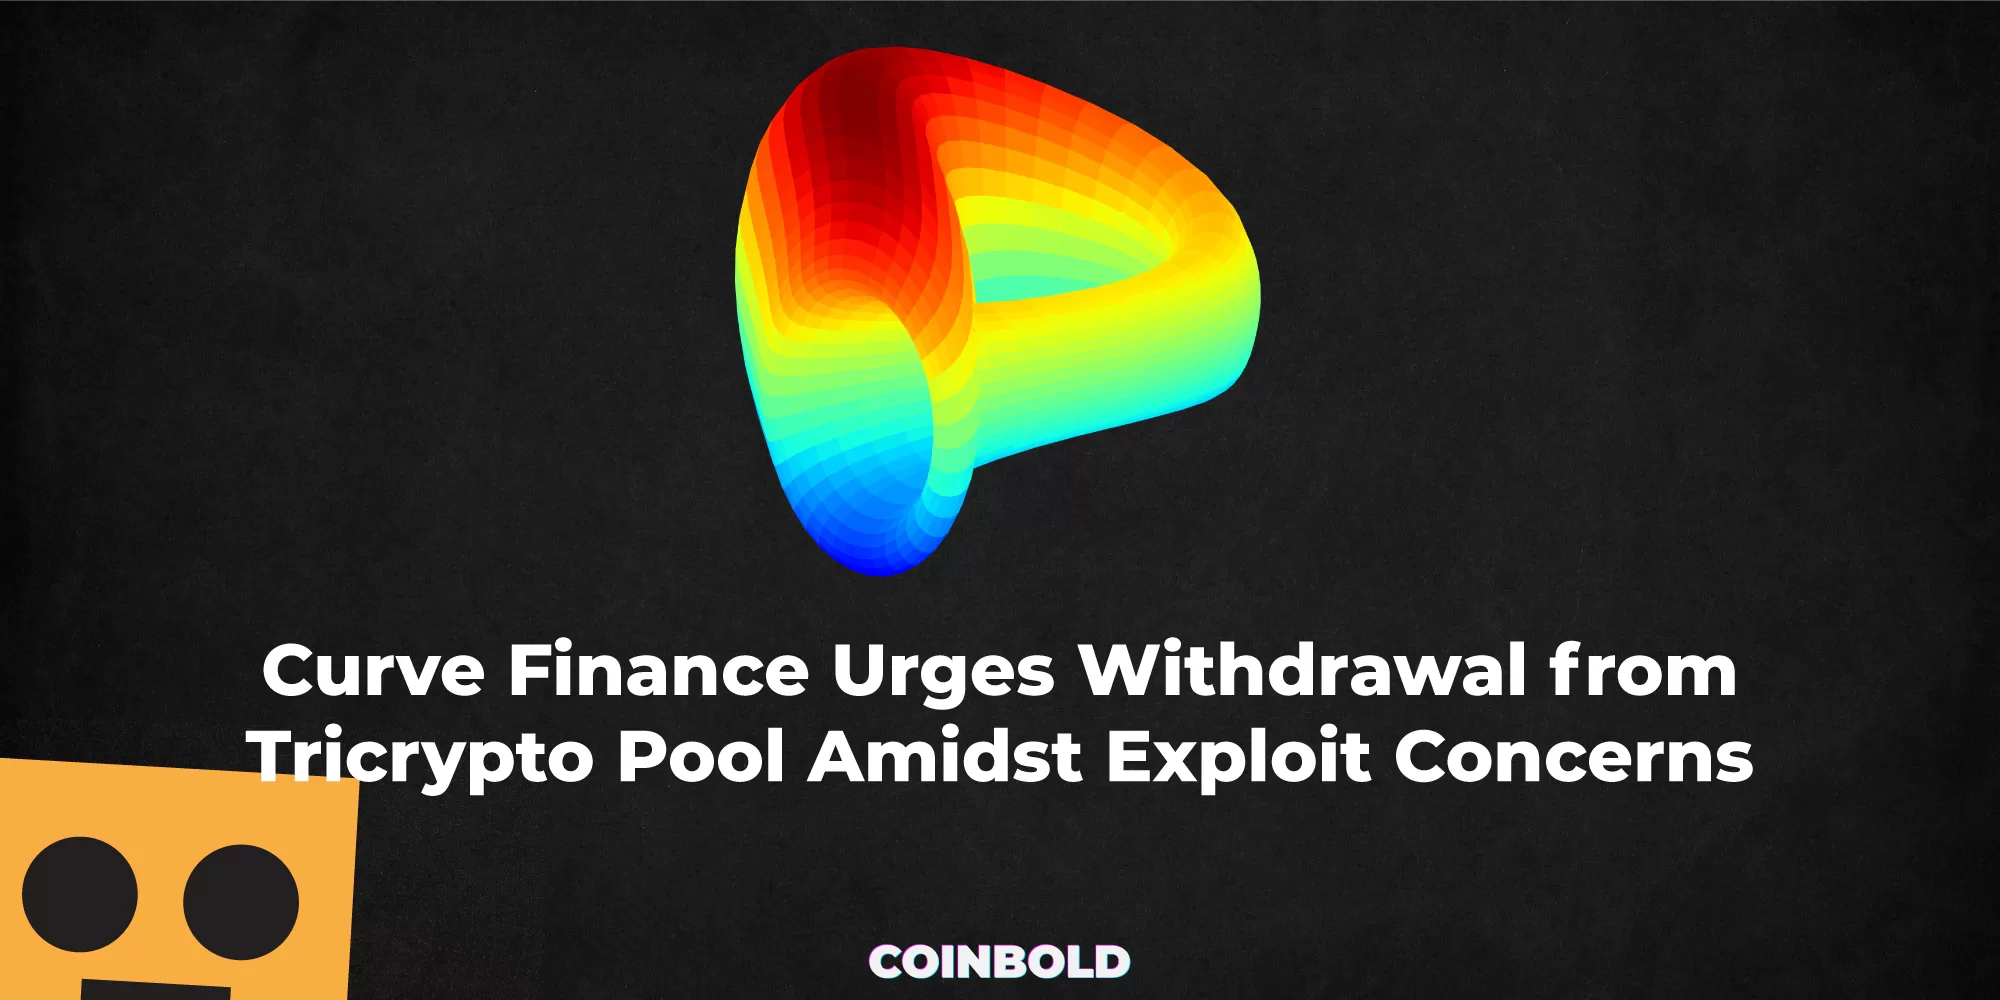 Curve Finance Urges Withdrawal from Tricrypto Pool Amidst Exploit Concerns